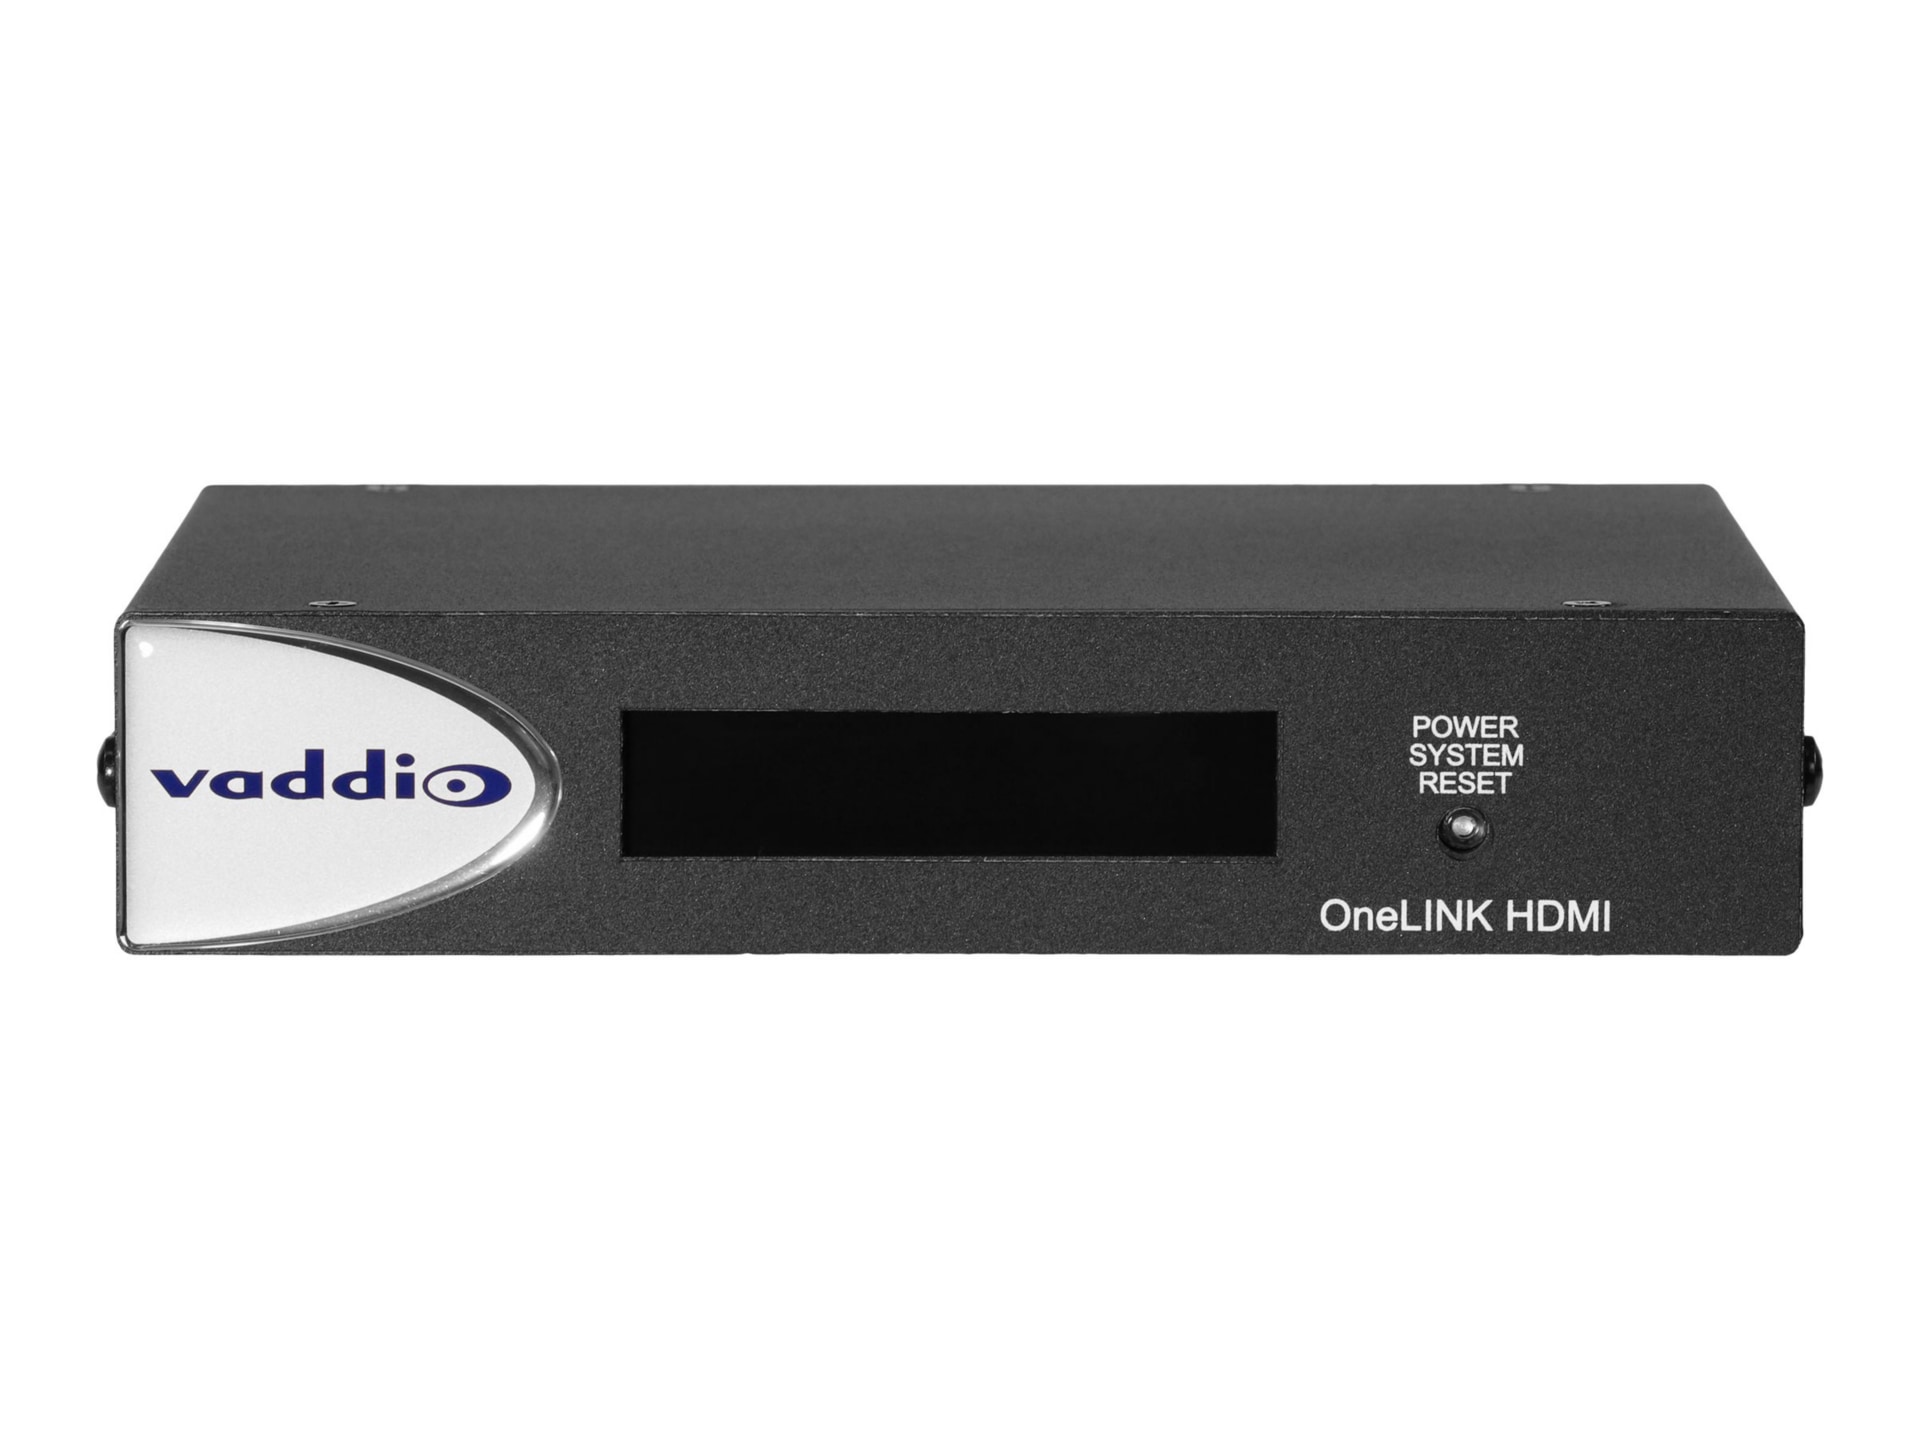 Vaddio DocCAM 20 HDBT OneLINK HDMI Video Conferencing System - Includes Doc